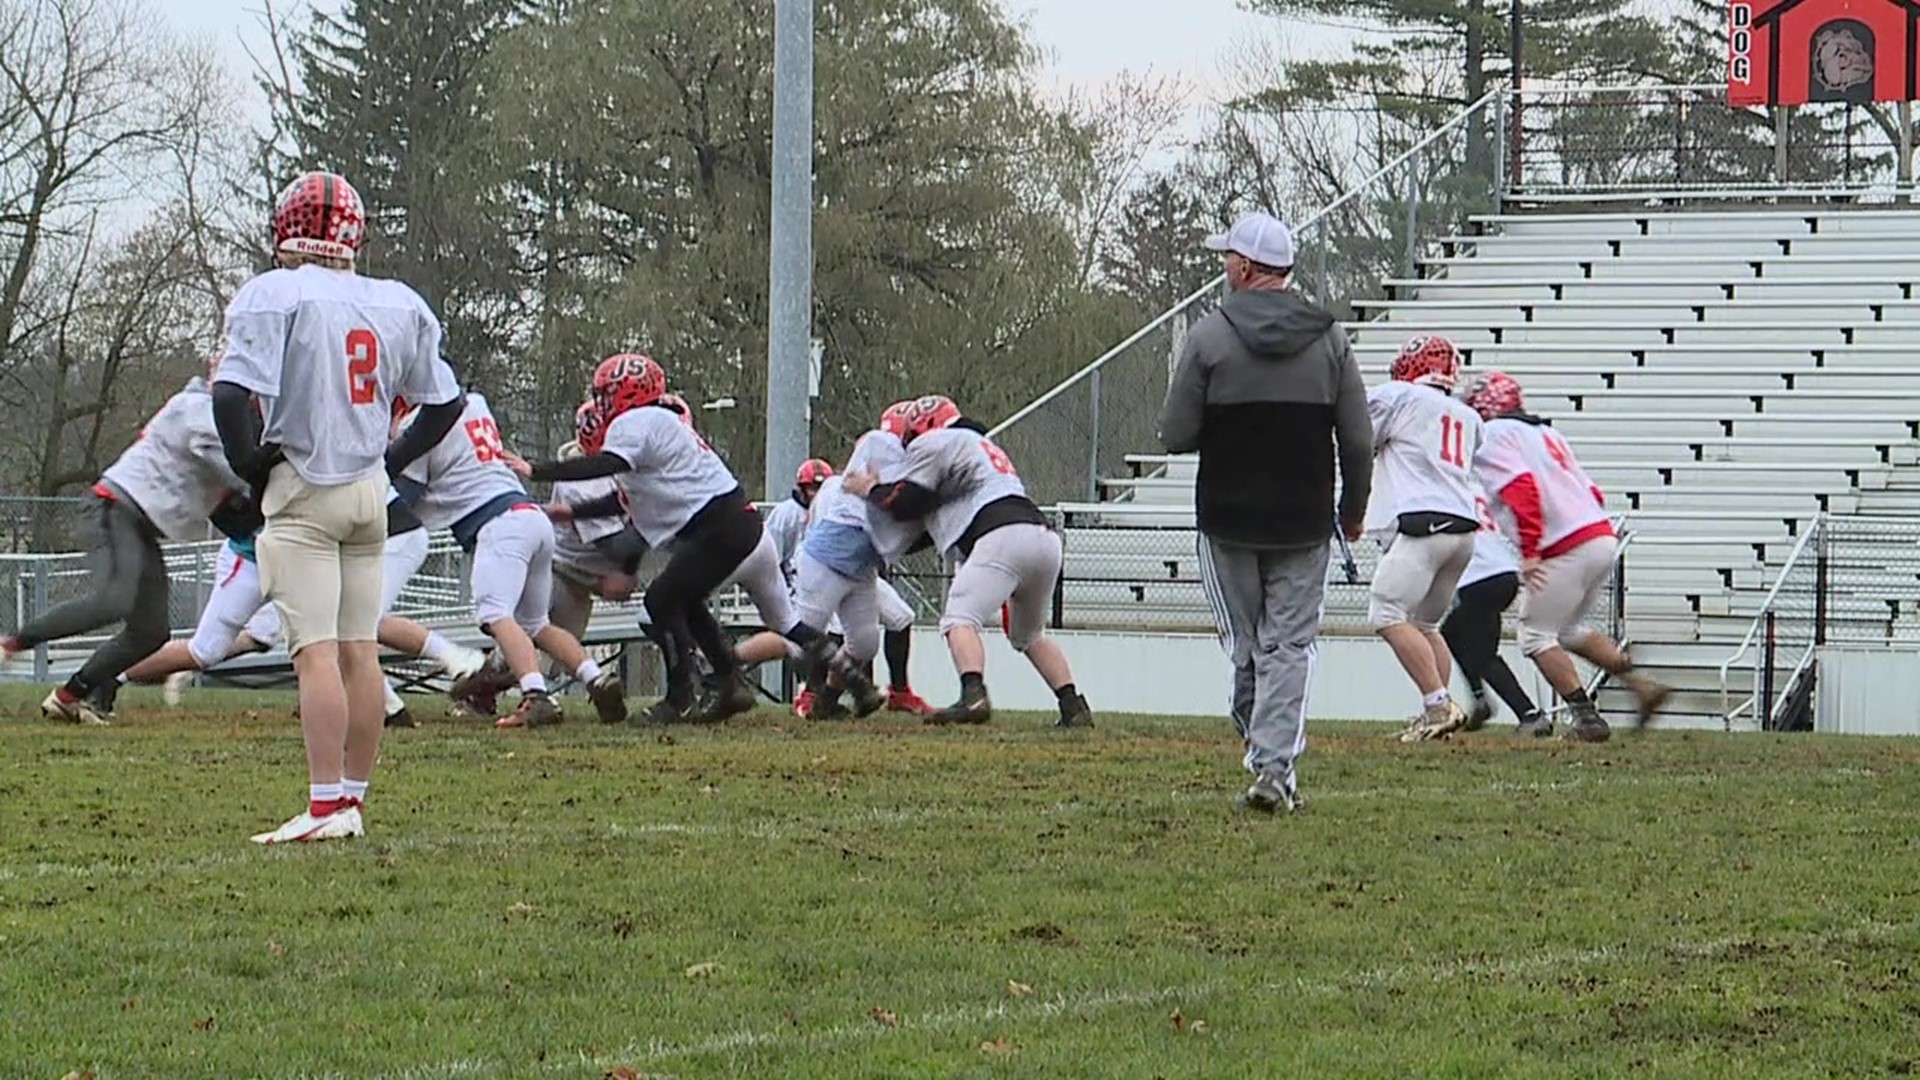 For Jersey Shore High School, practicing football on Thanksgiving is becoming routine.